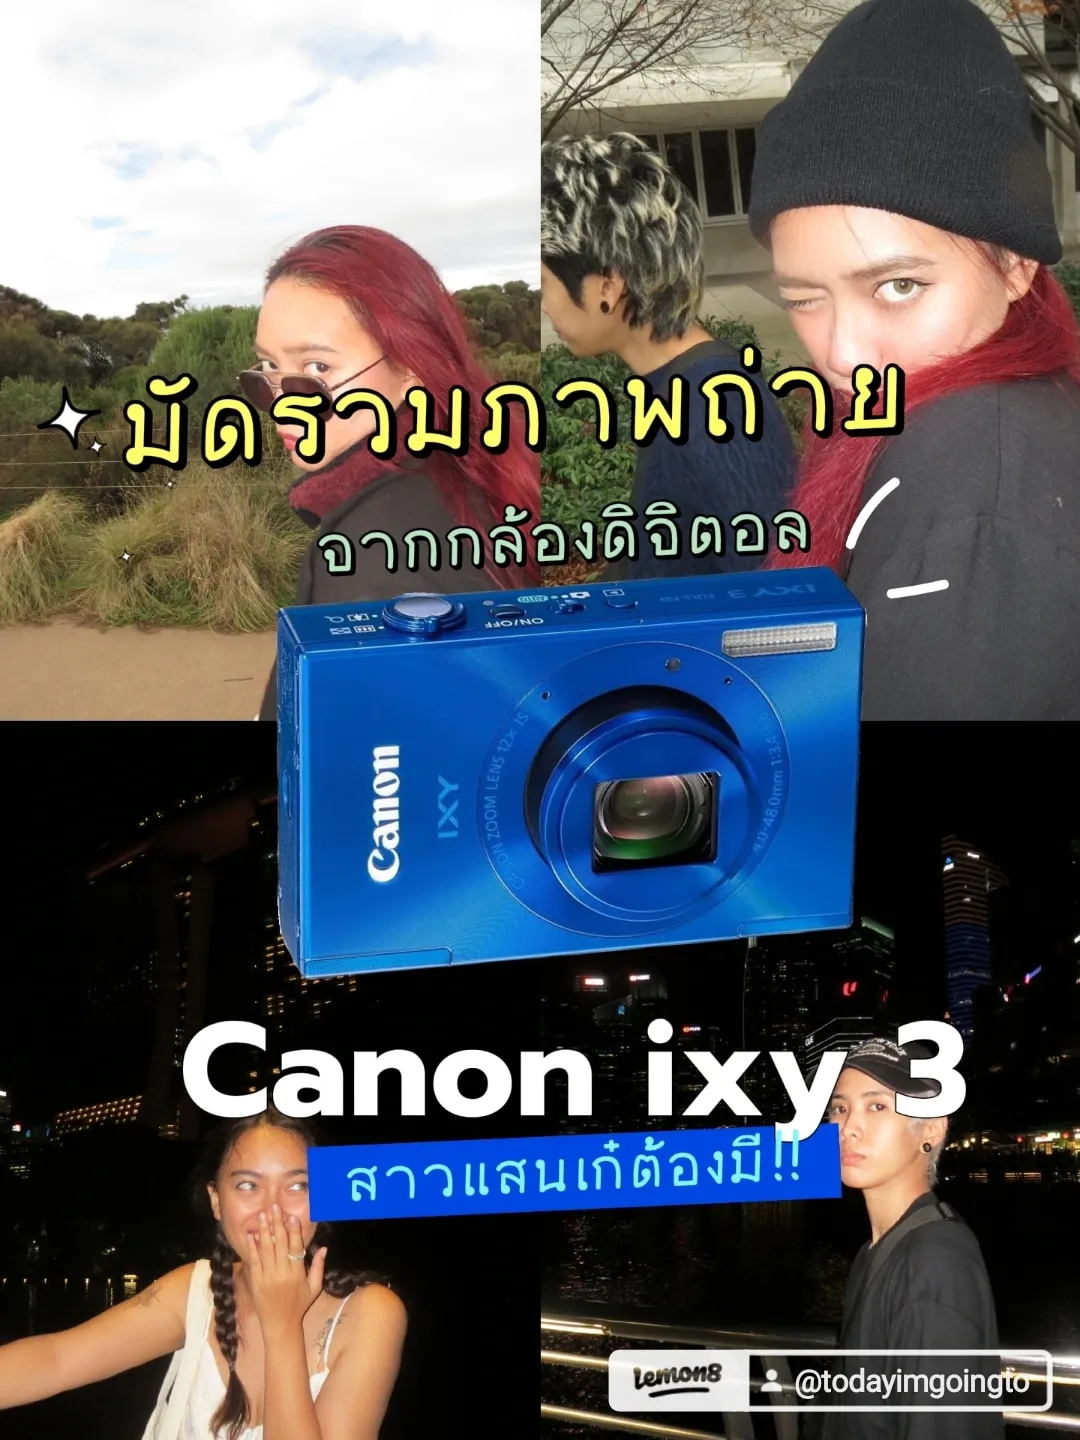 Bundle of images from the Canon ixy3 camera | Gallery posted by